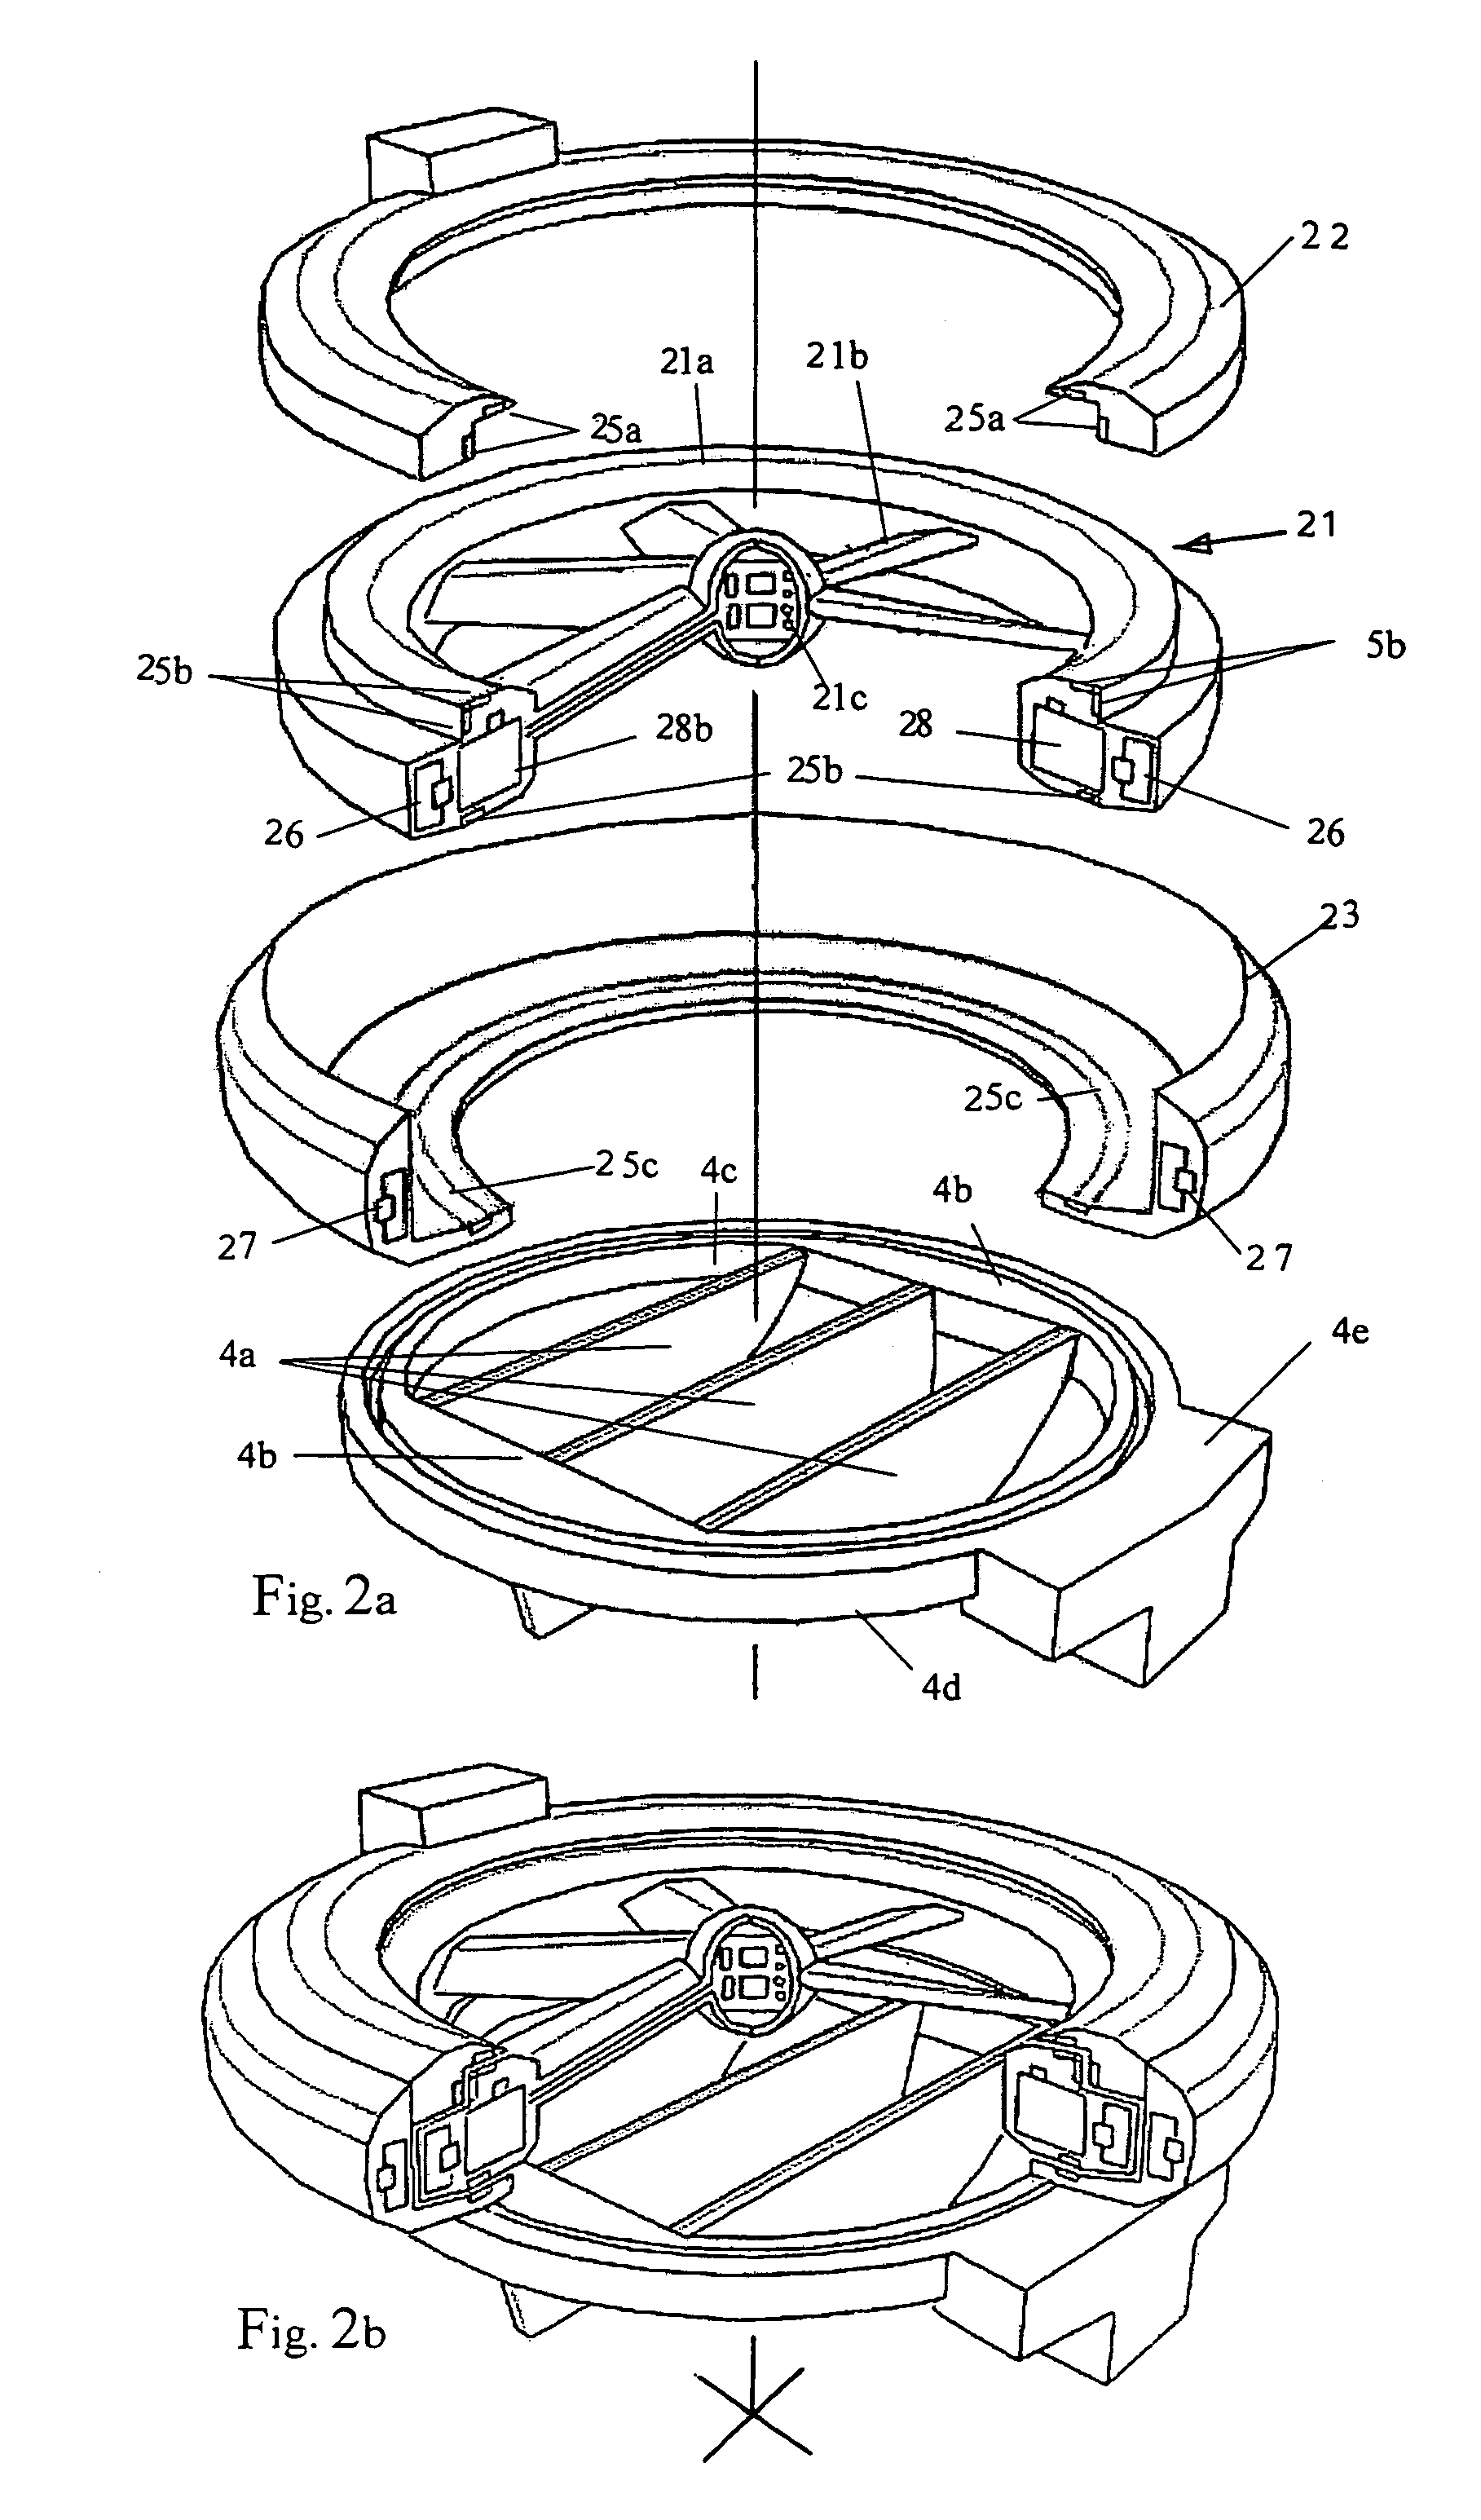 Quiet vertical takeoff and landing aircraft using ducted, magnetic induction air-impeller rotors